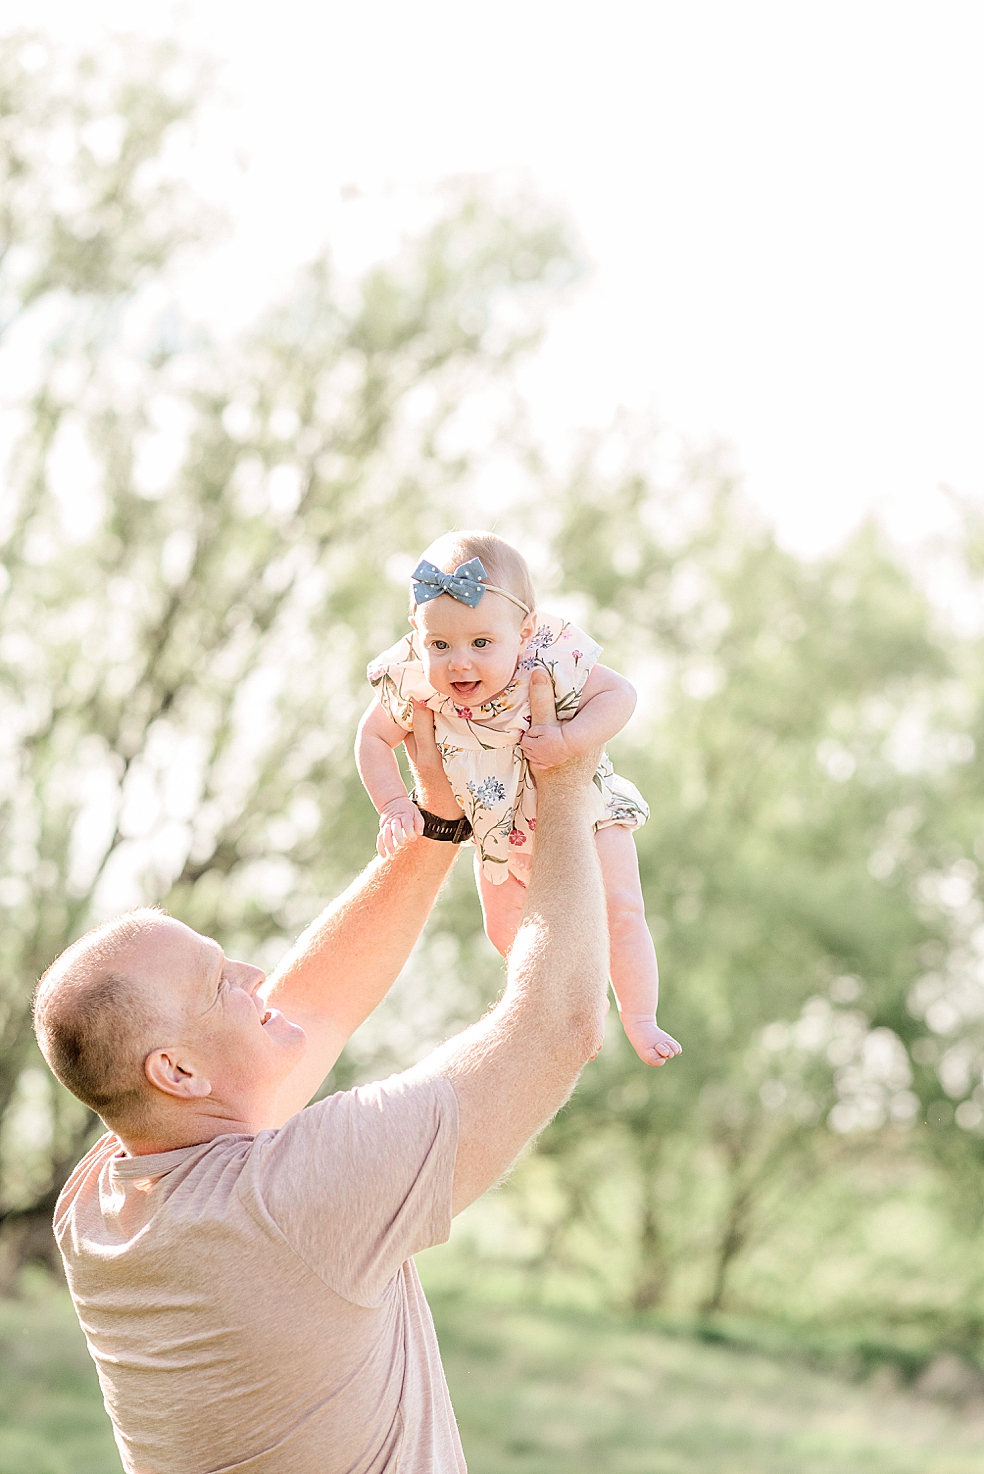 Dad playing airplane with his baby girl | Photo by Jessica Lee Photography